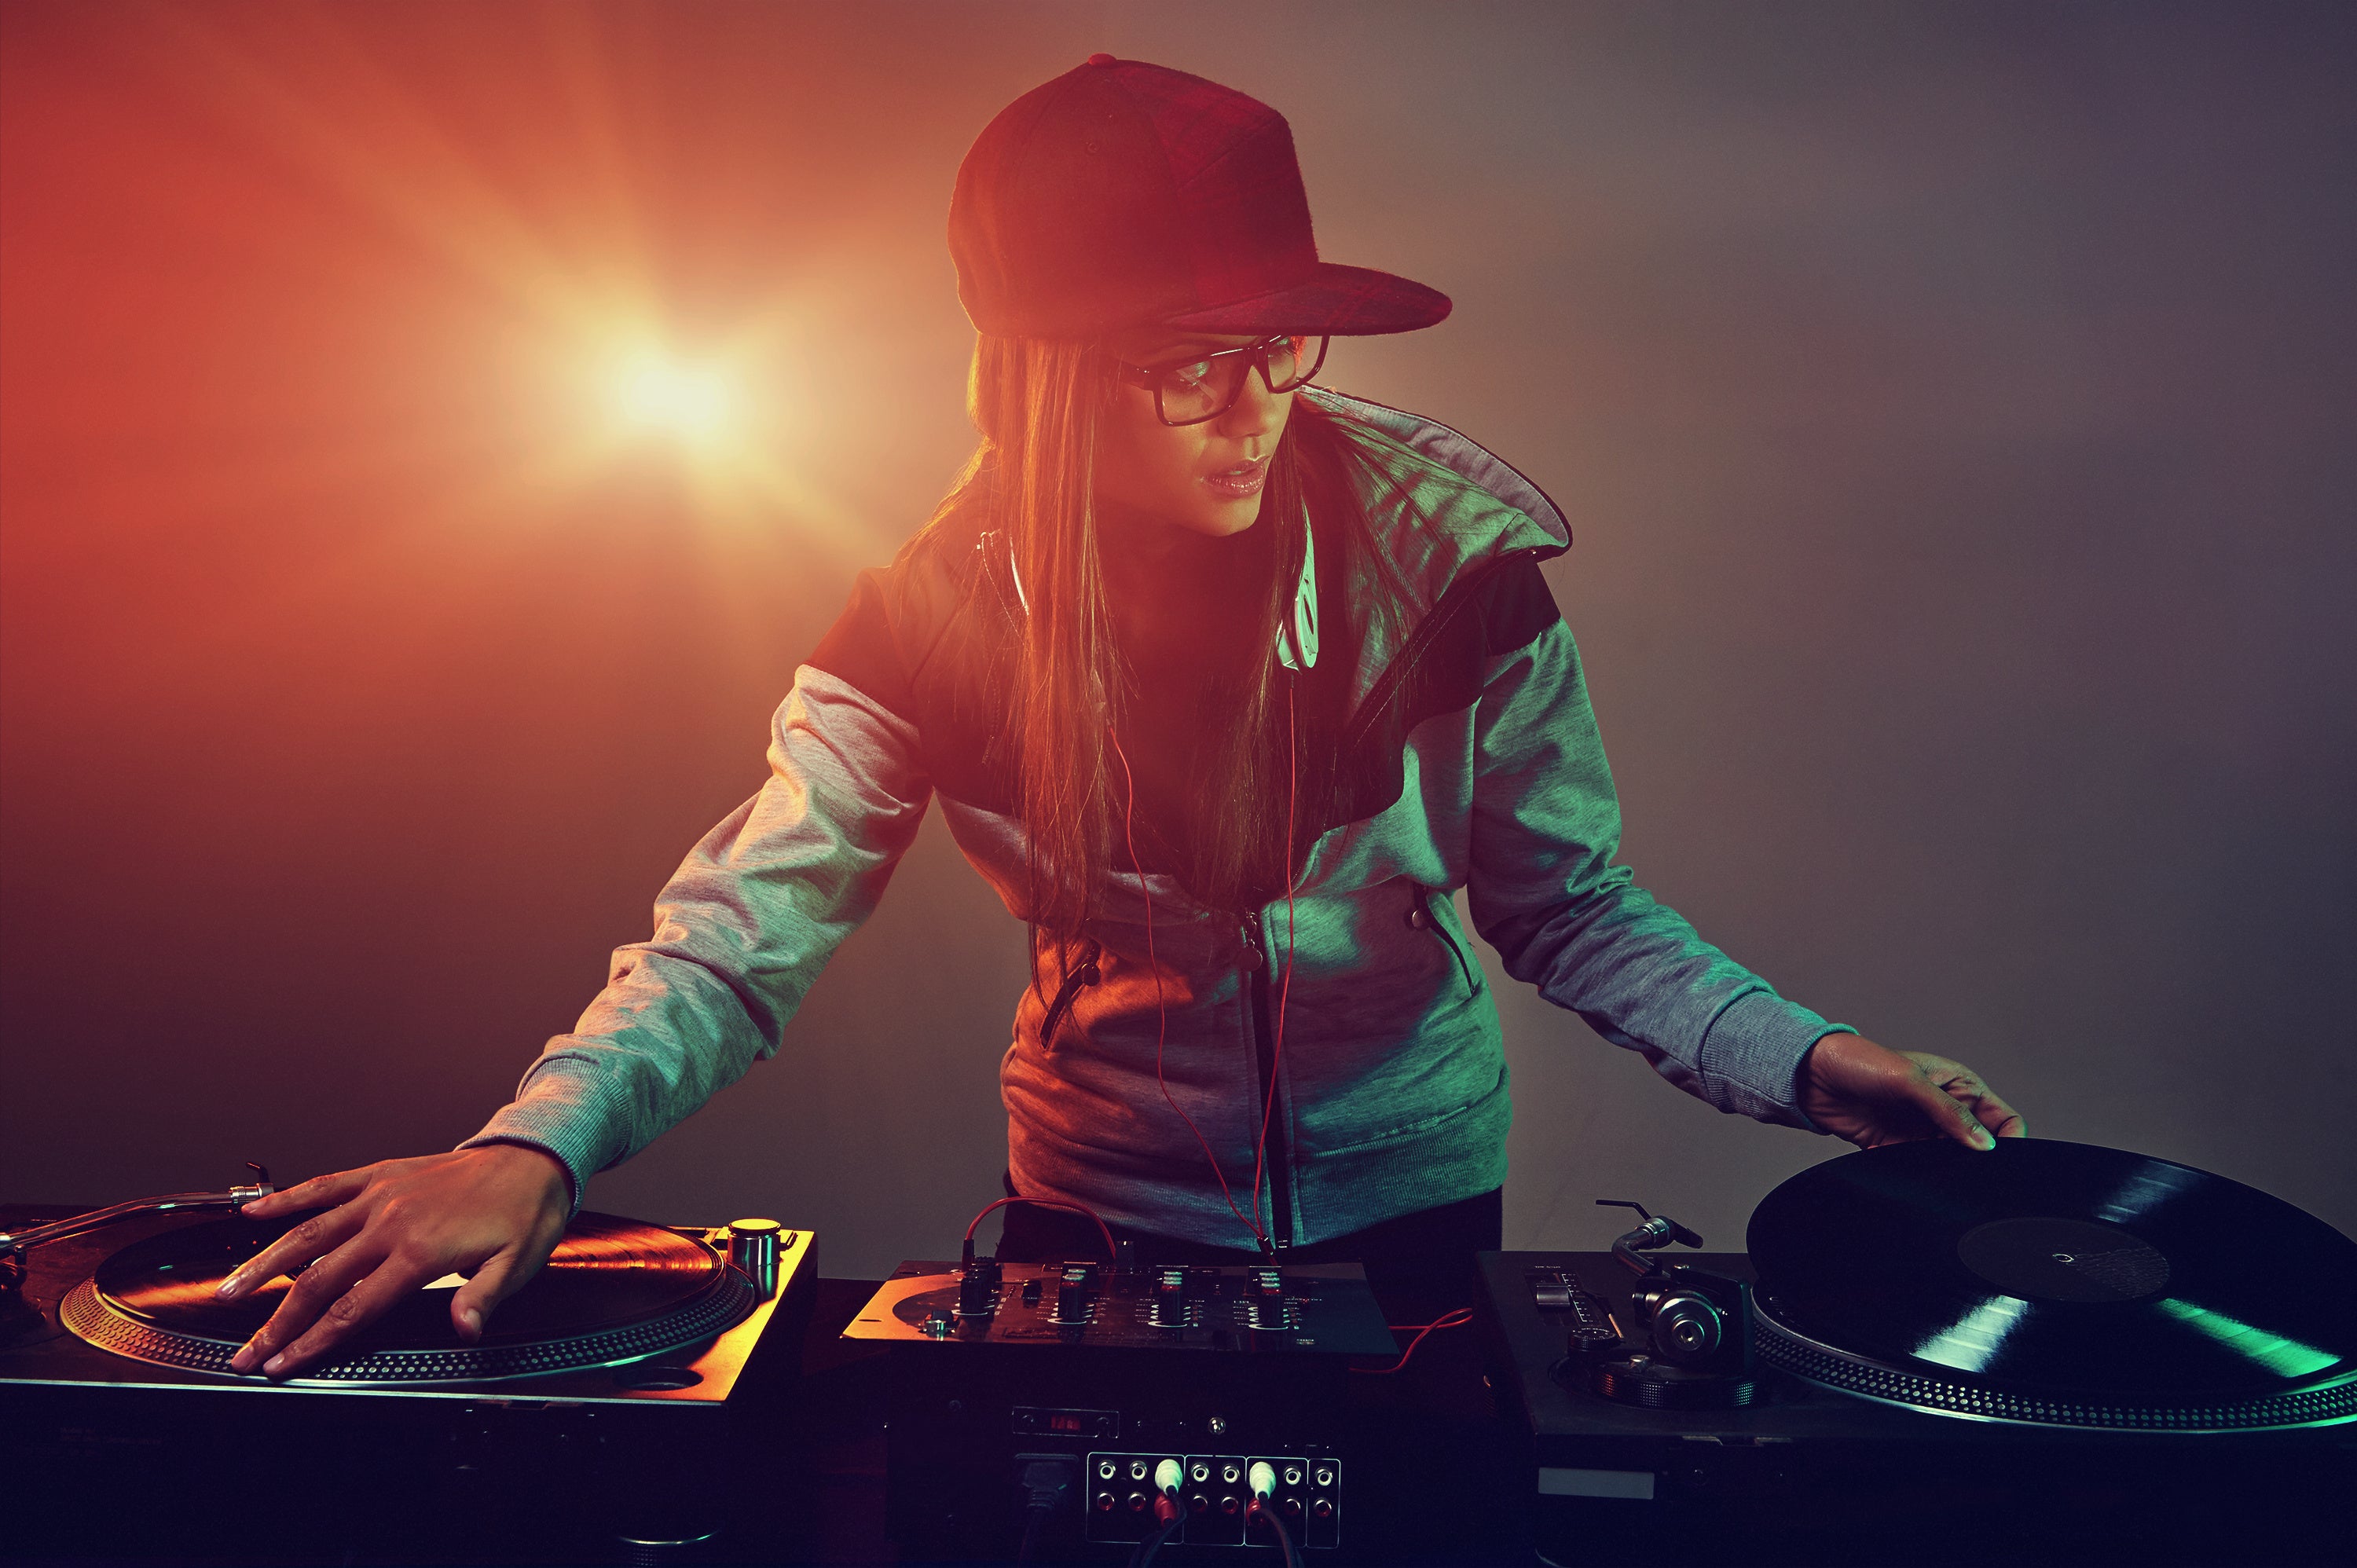 Top 7 Best DJ Software to get Ultimate DJ Experience